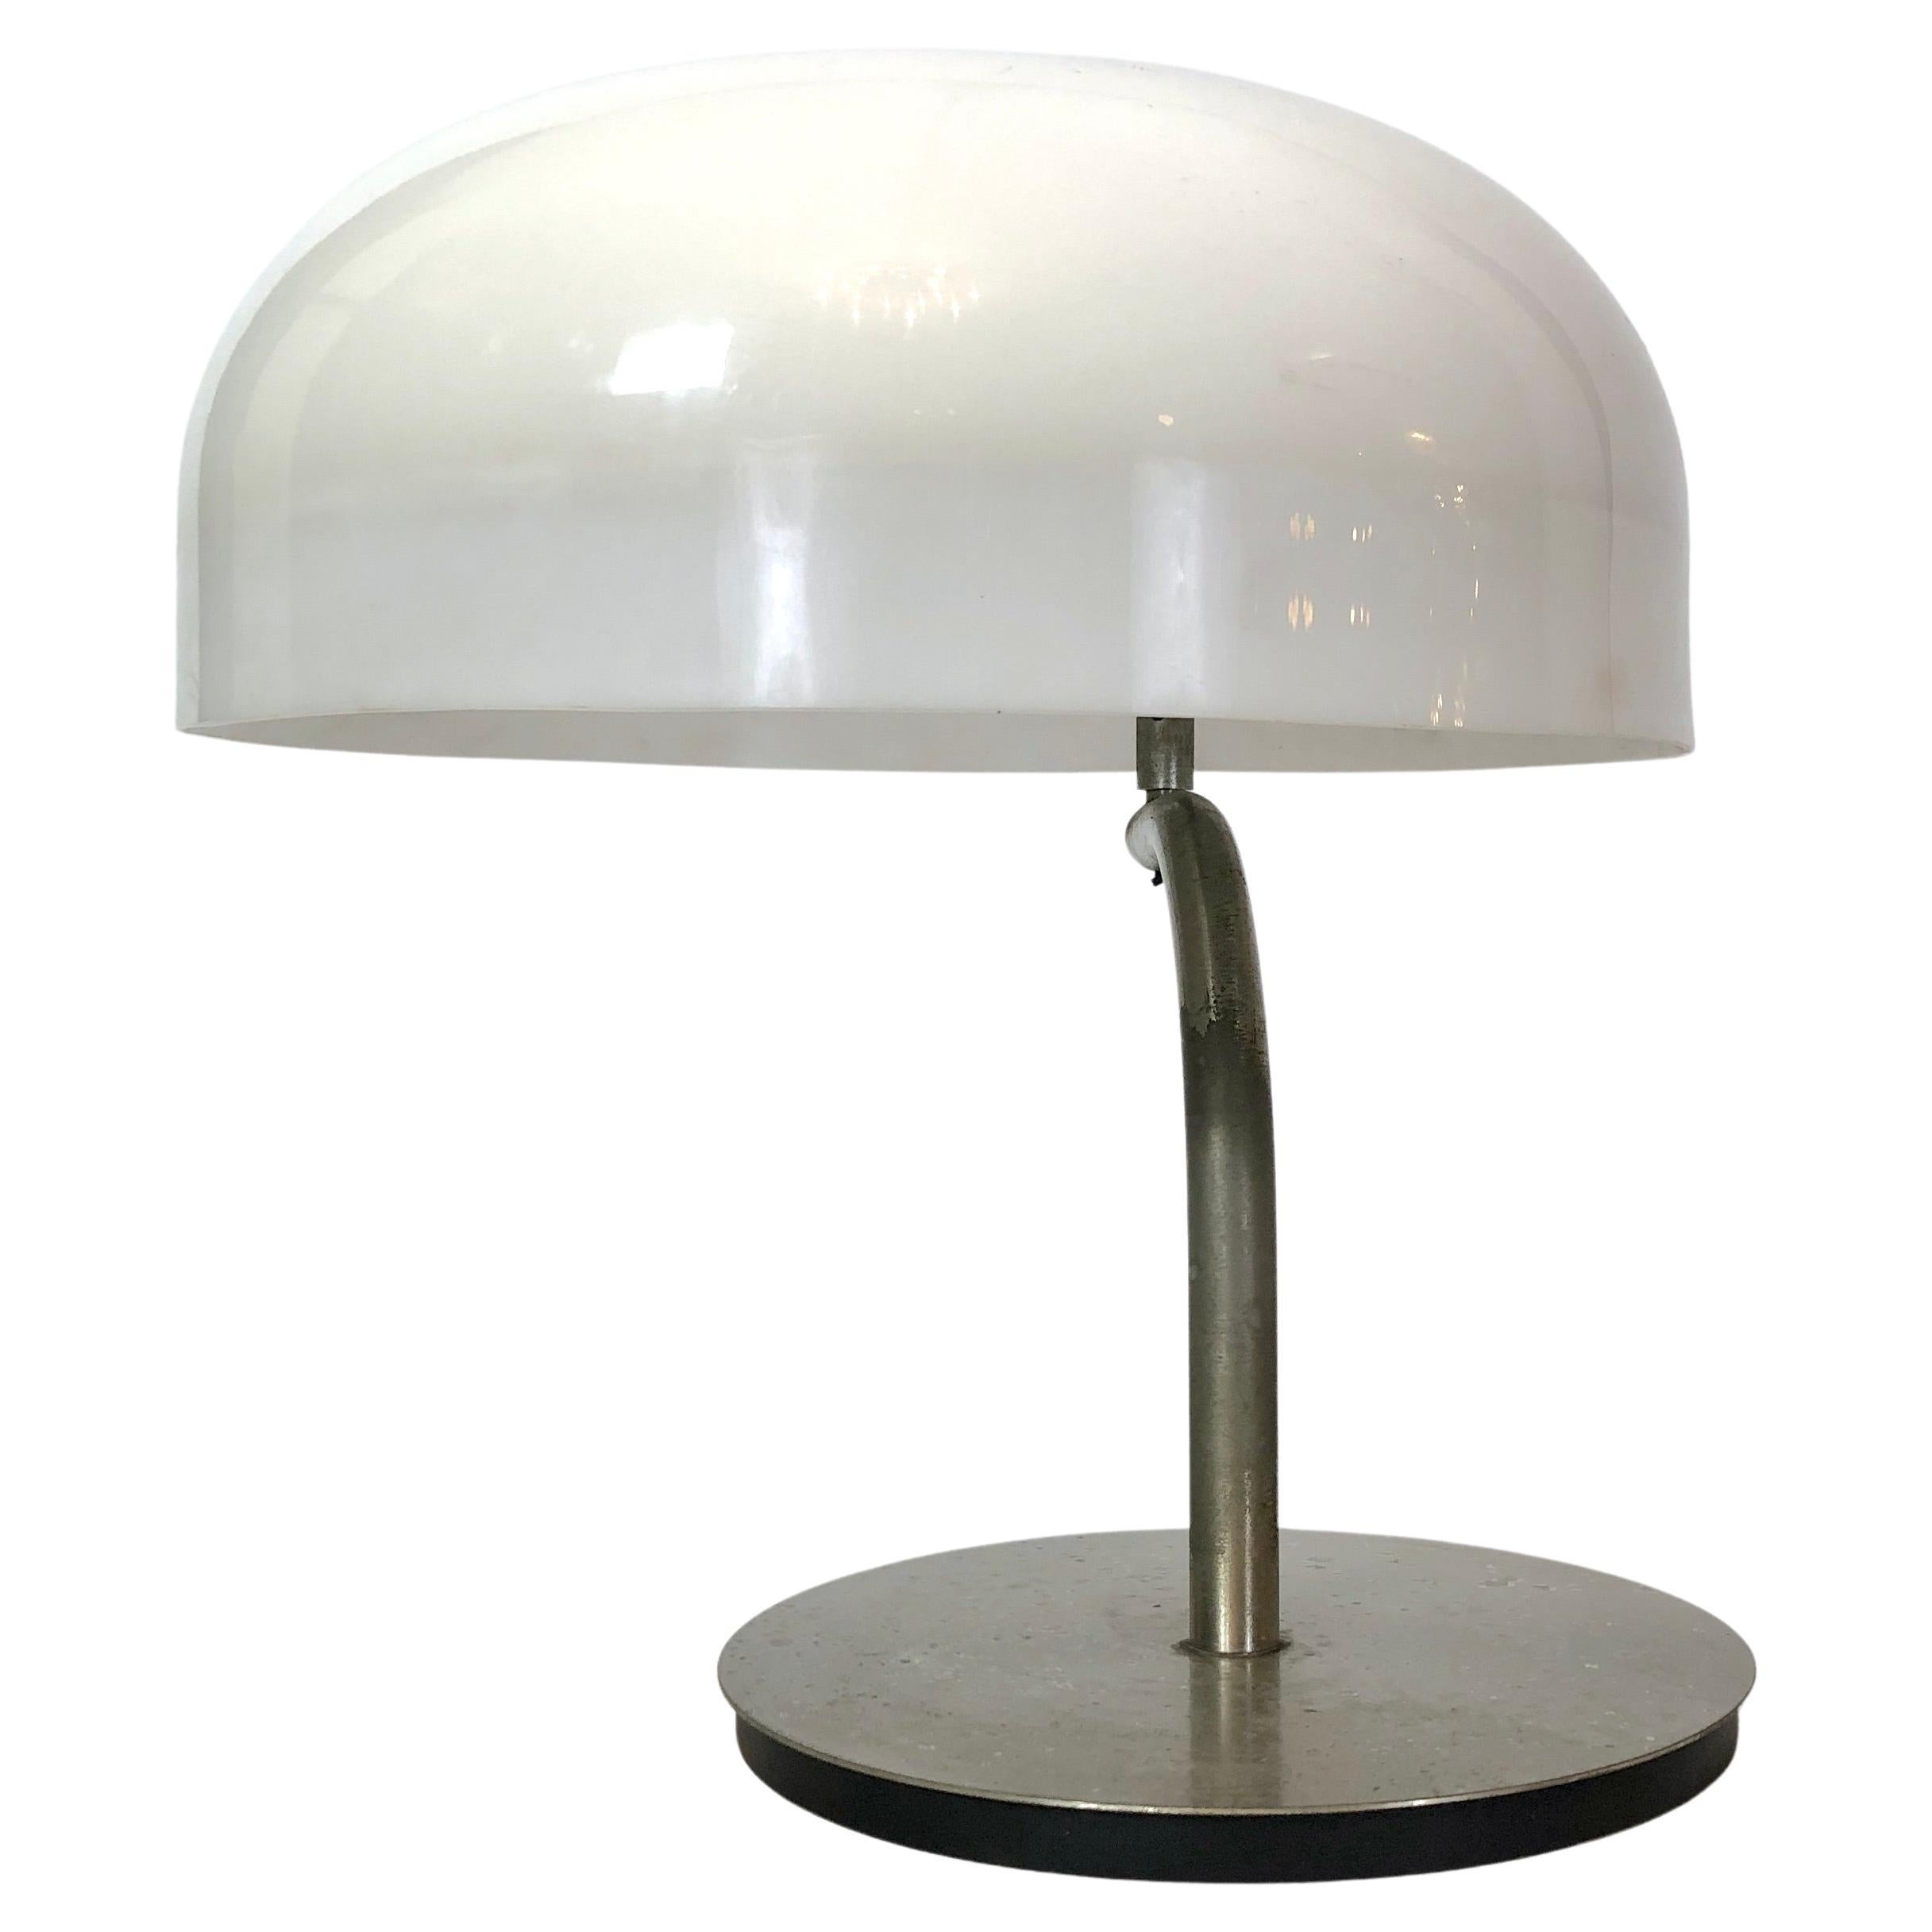 Giotto Stoppino, Italian Vintage Table Lamp from 70s